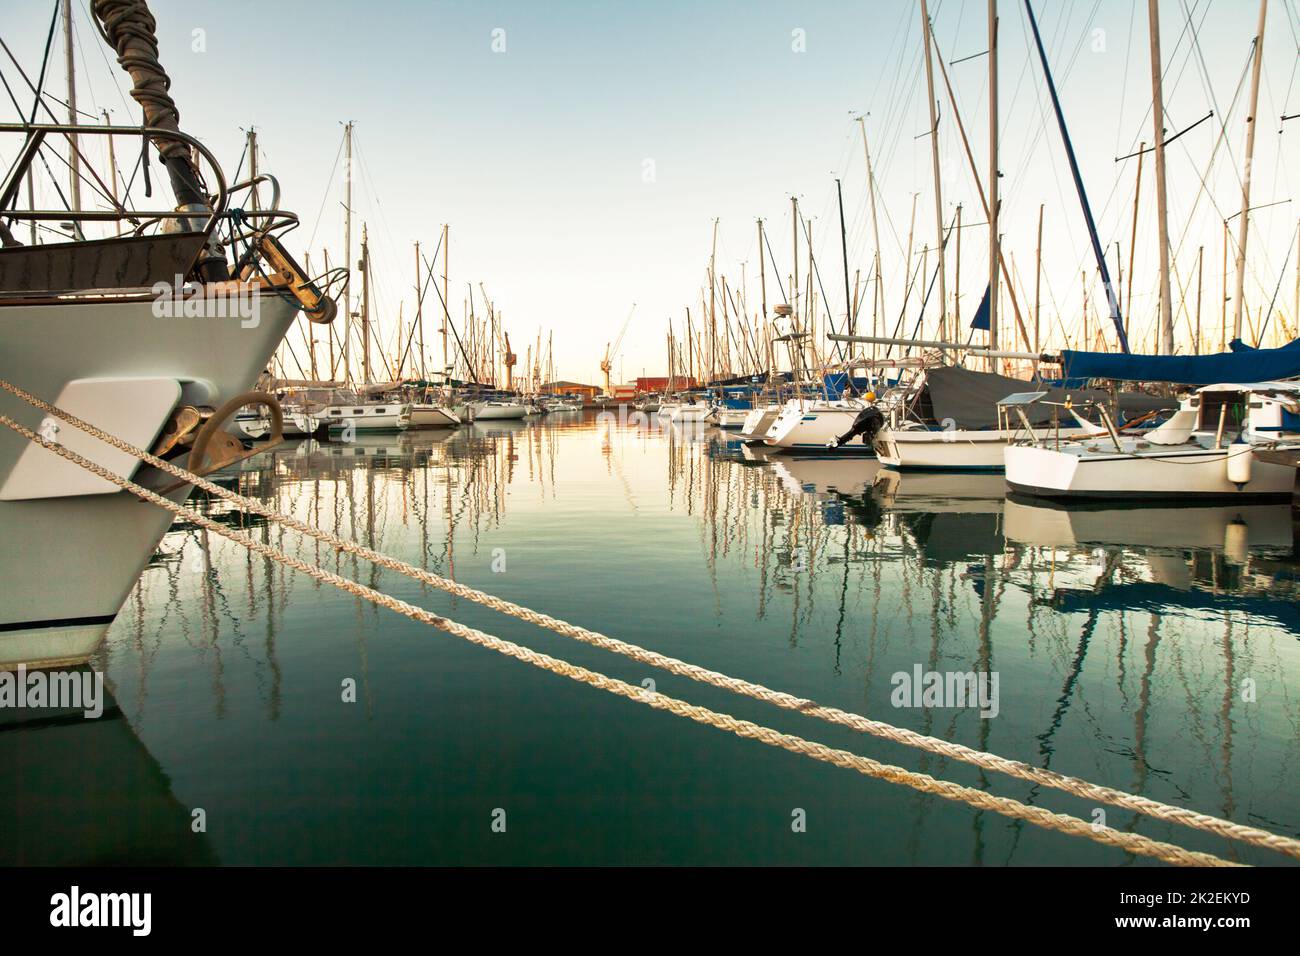 Safe harbour in a stormy world. A photo of a harbor with anchored ships.. Stock Photo